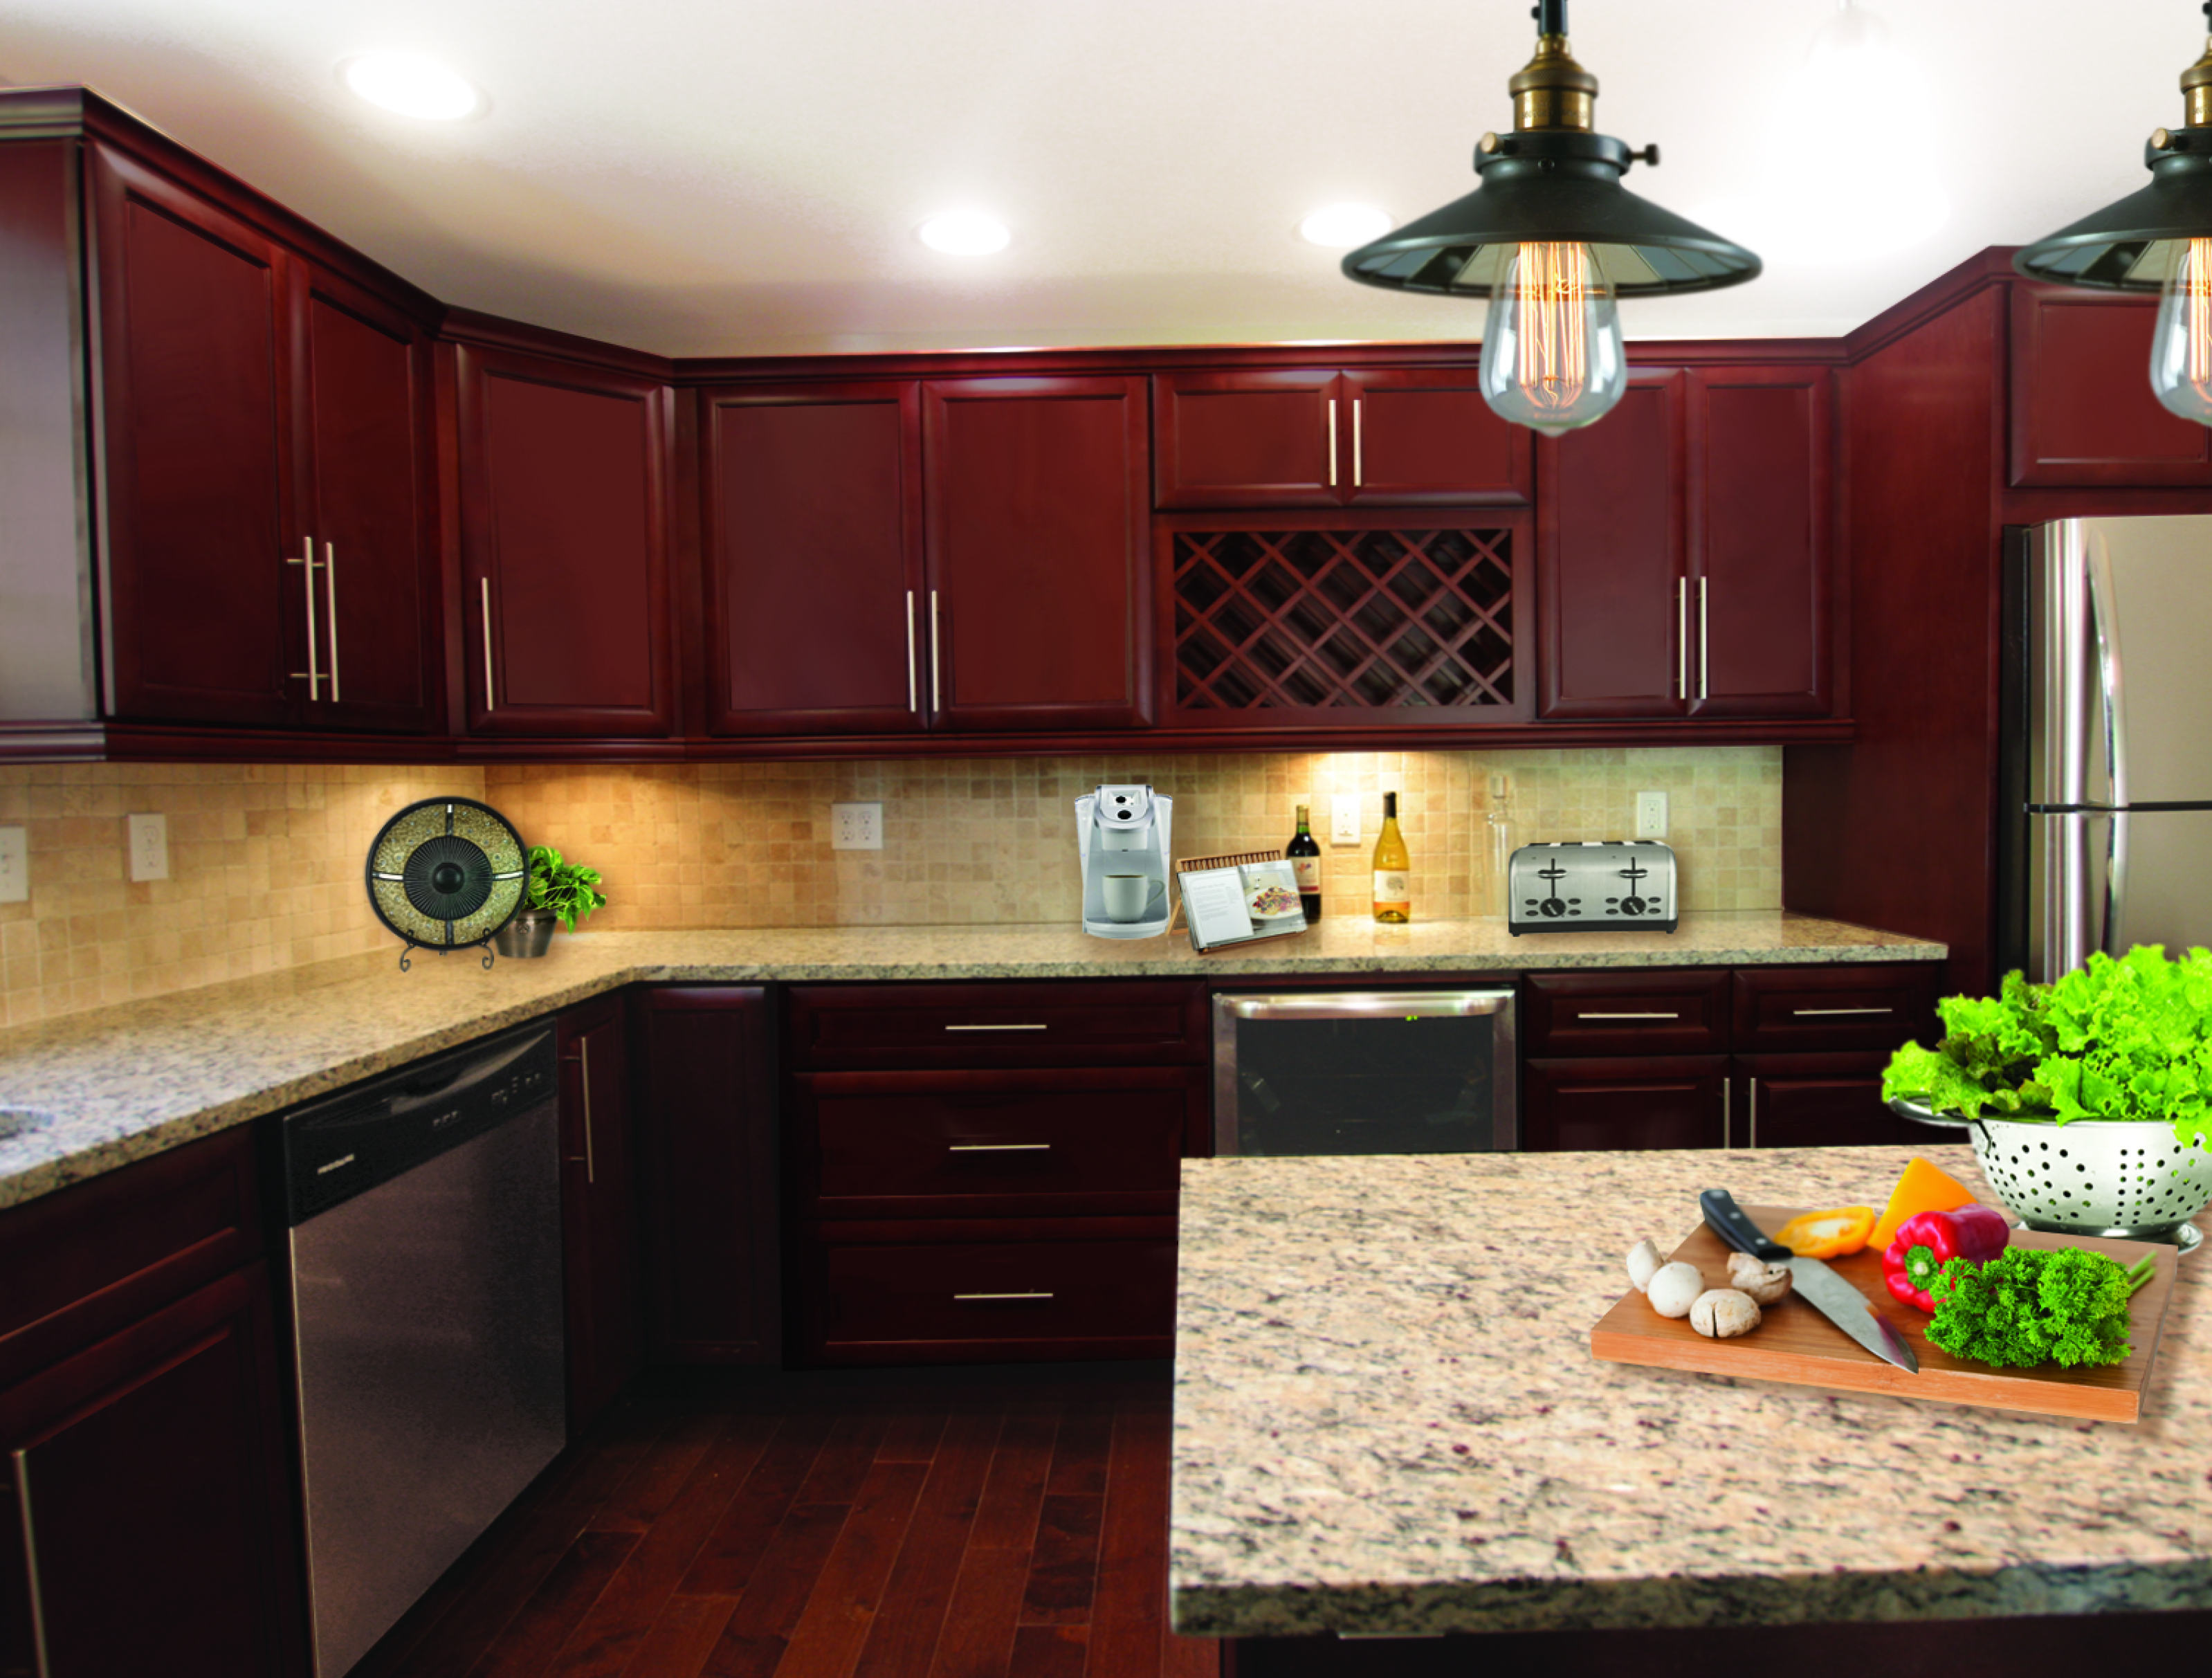 High Quality Wholesale Kitchen & Vanity at Discounted Prices